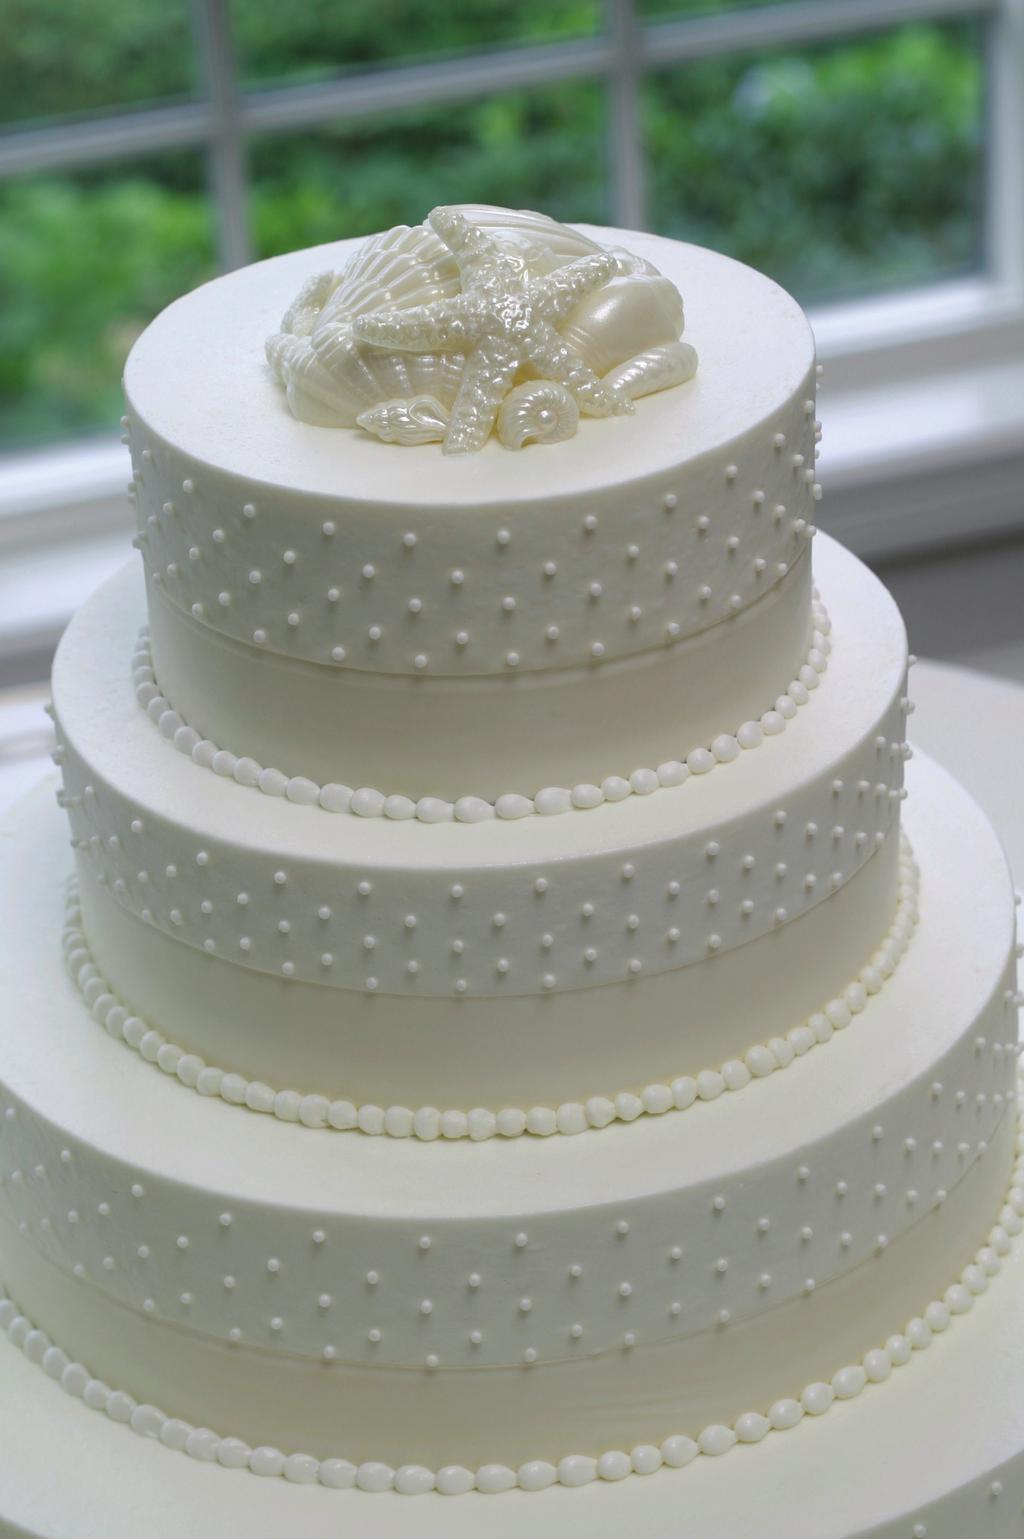 Wedding Cake We will supply a custom-designed wedding cake with a fine selection of flavors and fillings to choose from Table Side Coffee Service Freshly Brewed Coffee, Decaffeinated Coffee and Tea